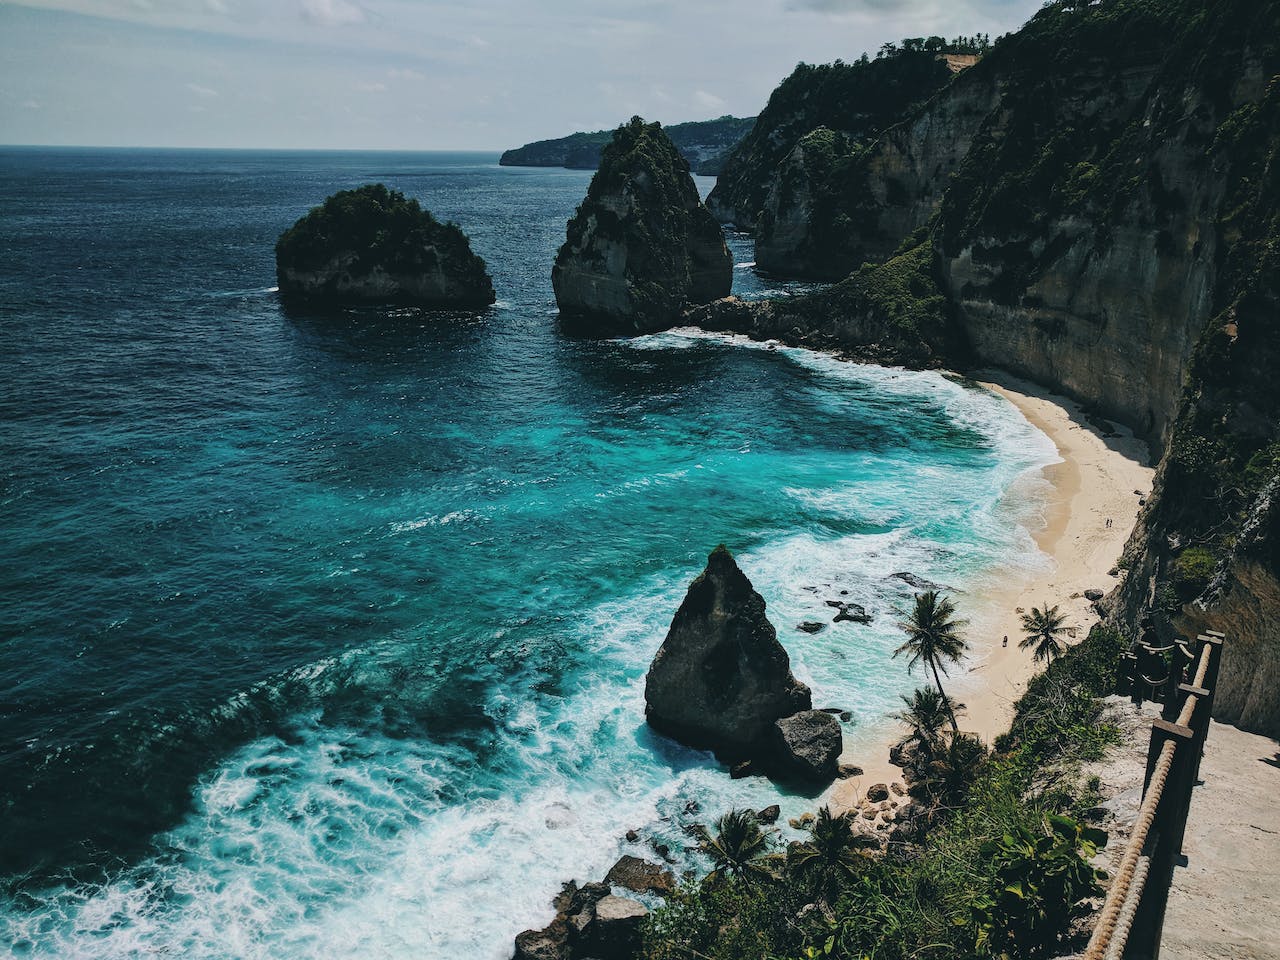 Exploring Bali? Here's 3 Tips to Get the Best Means of Transportation